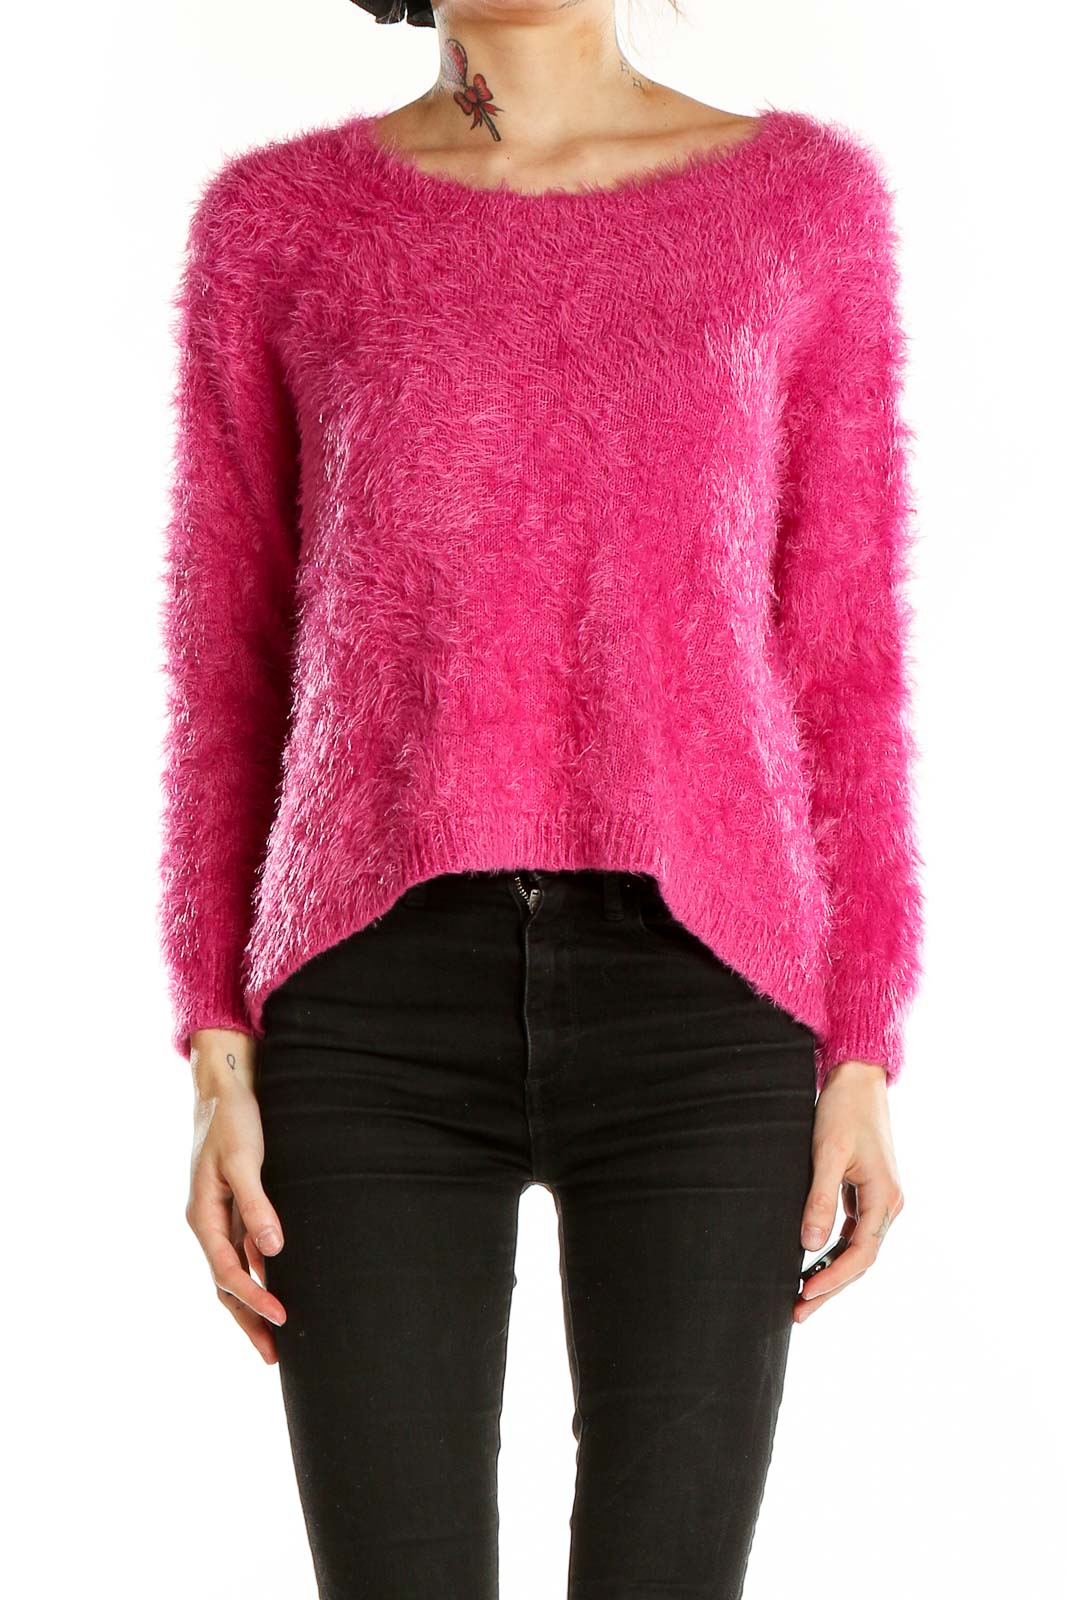 Pink Fuzzy Sweater Front